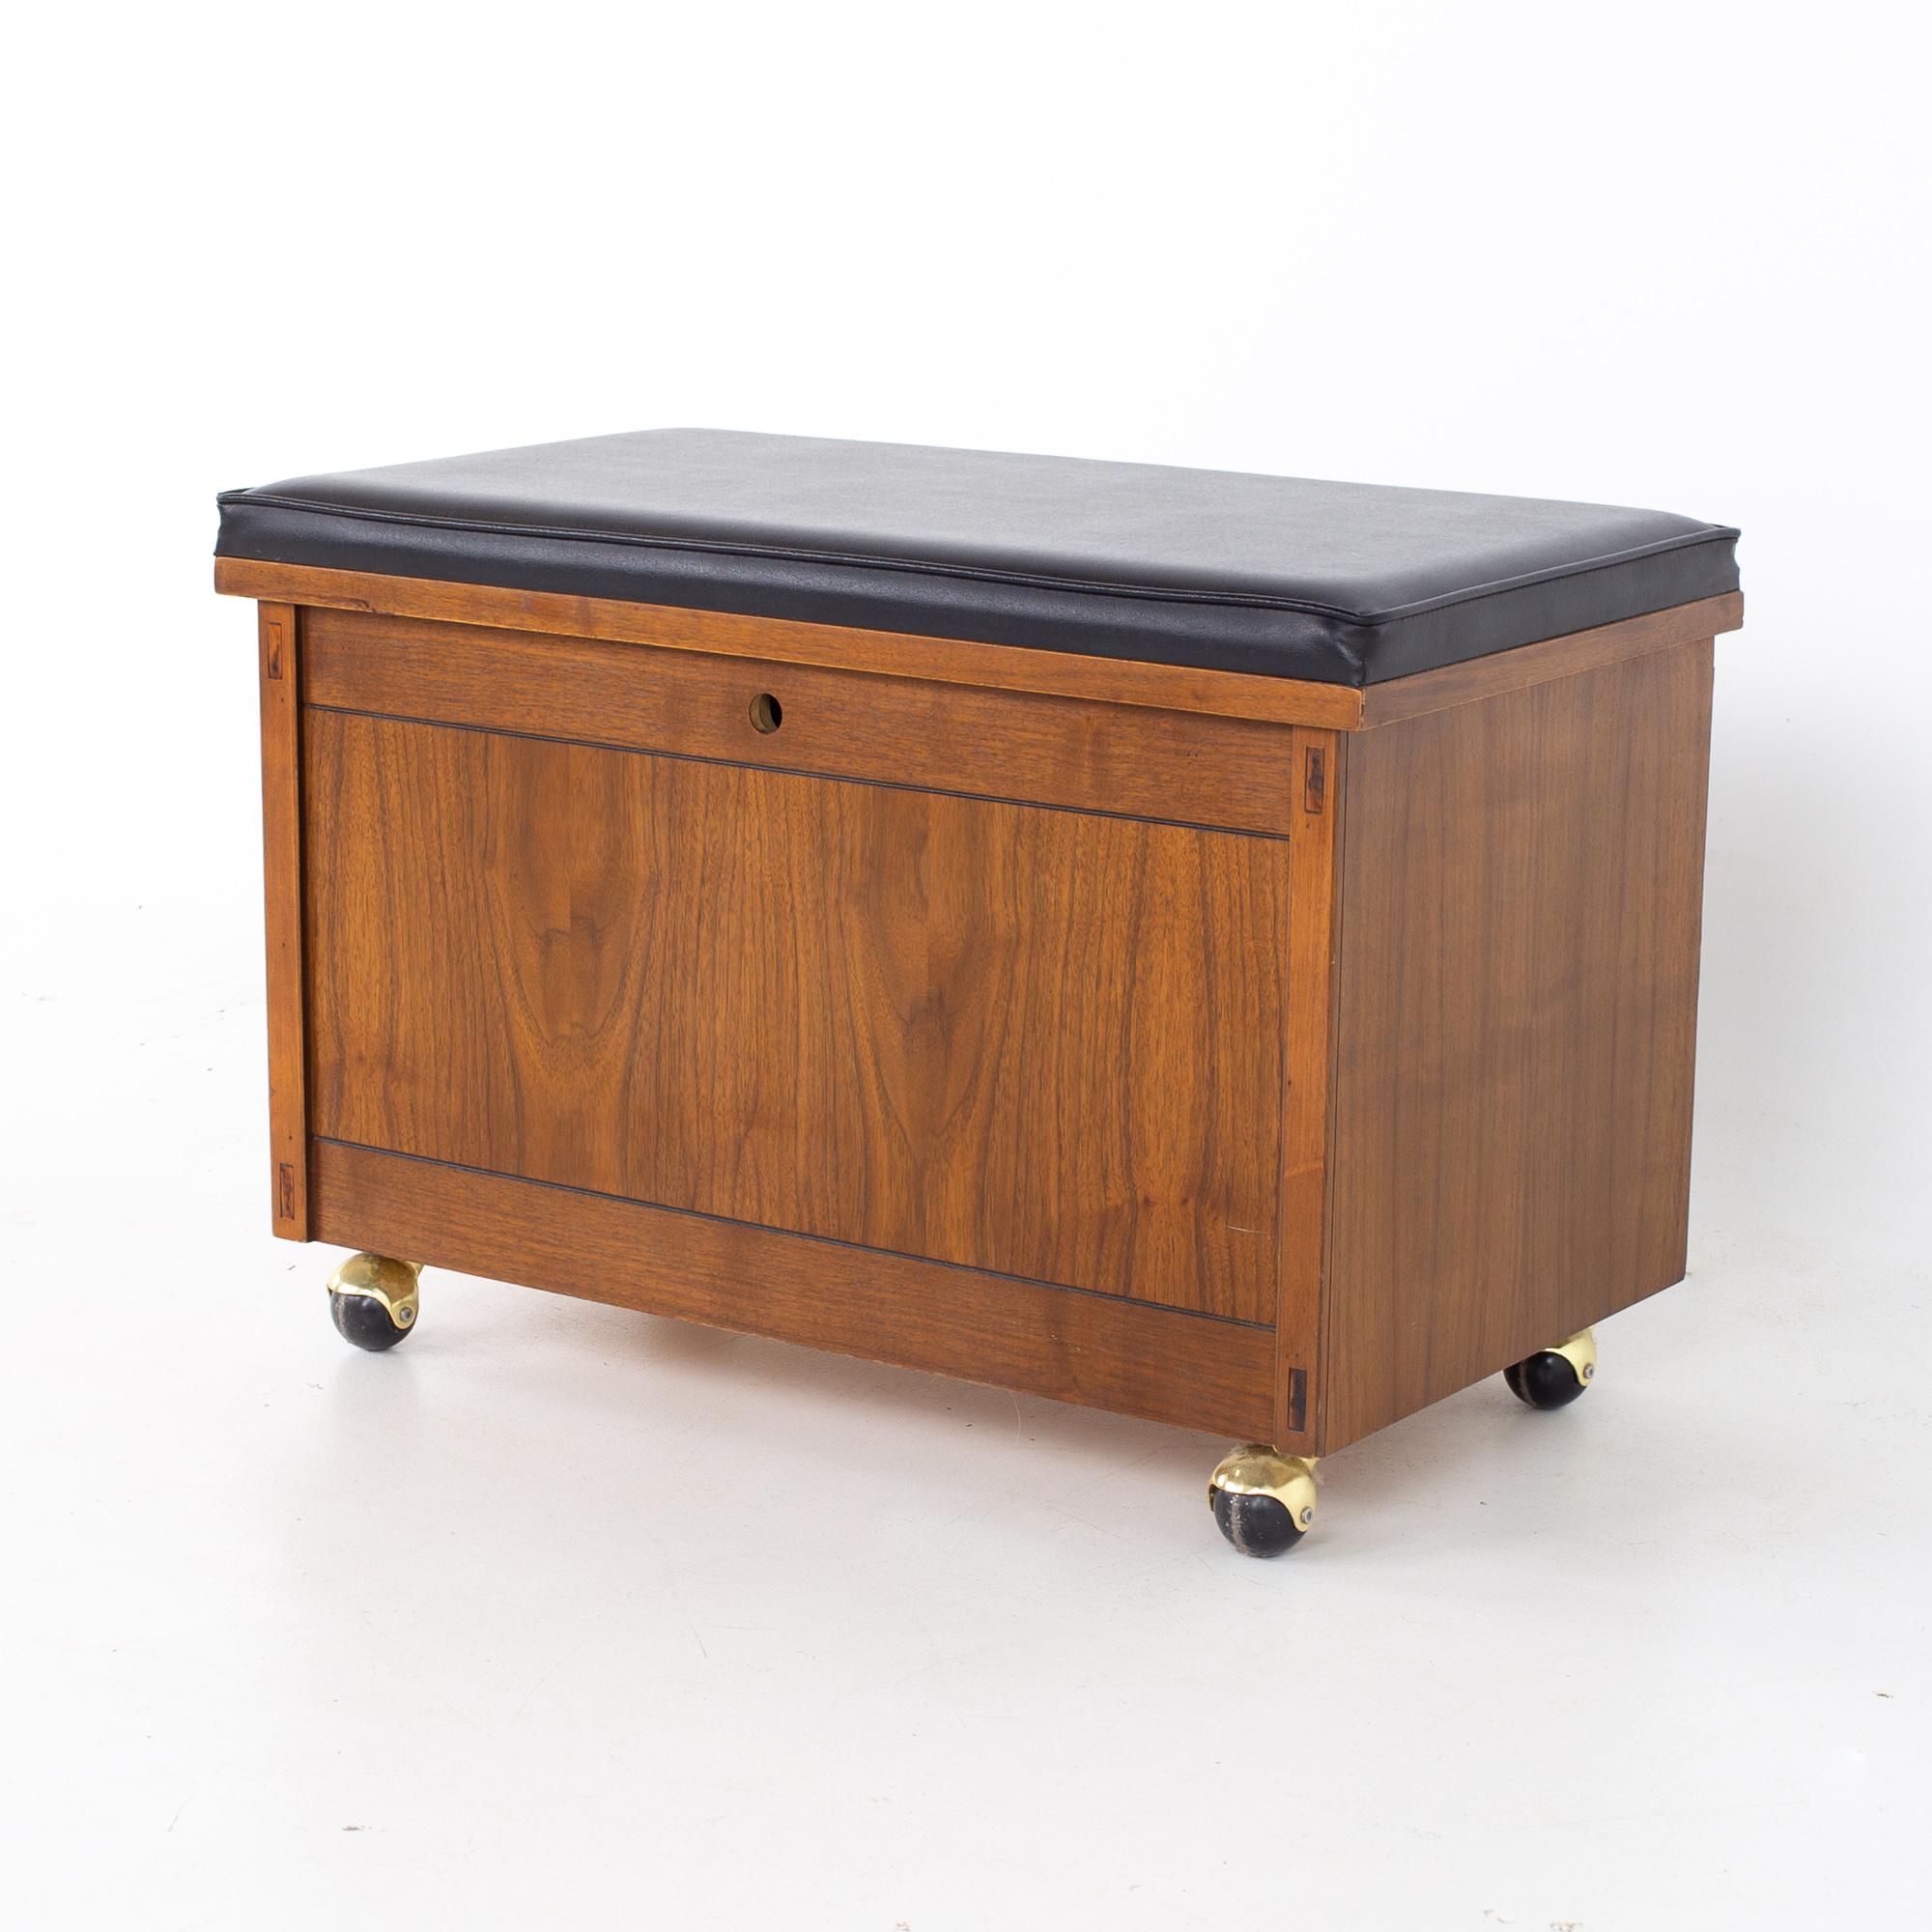 Lane mid century LP record storage bench
Bench measures: 27.5 wide x 16 deep x 18.25 inches high

All pieces of furniture can be had in what we call restored vintage condition. That means the piece is restored upon purchase so it’s free of